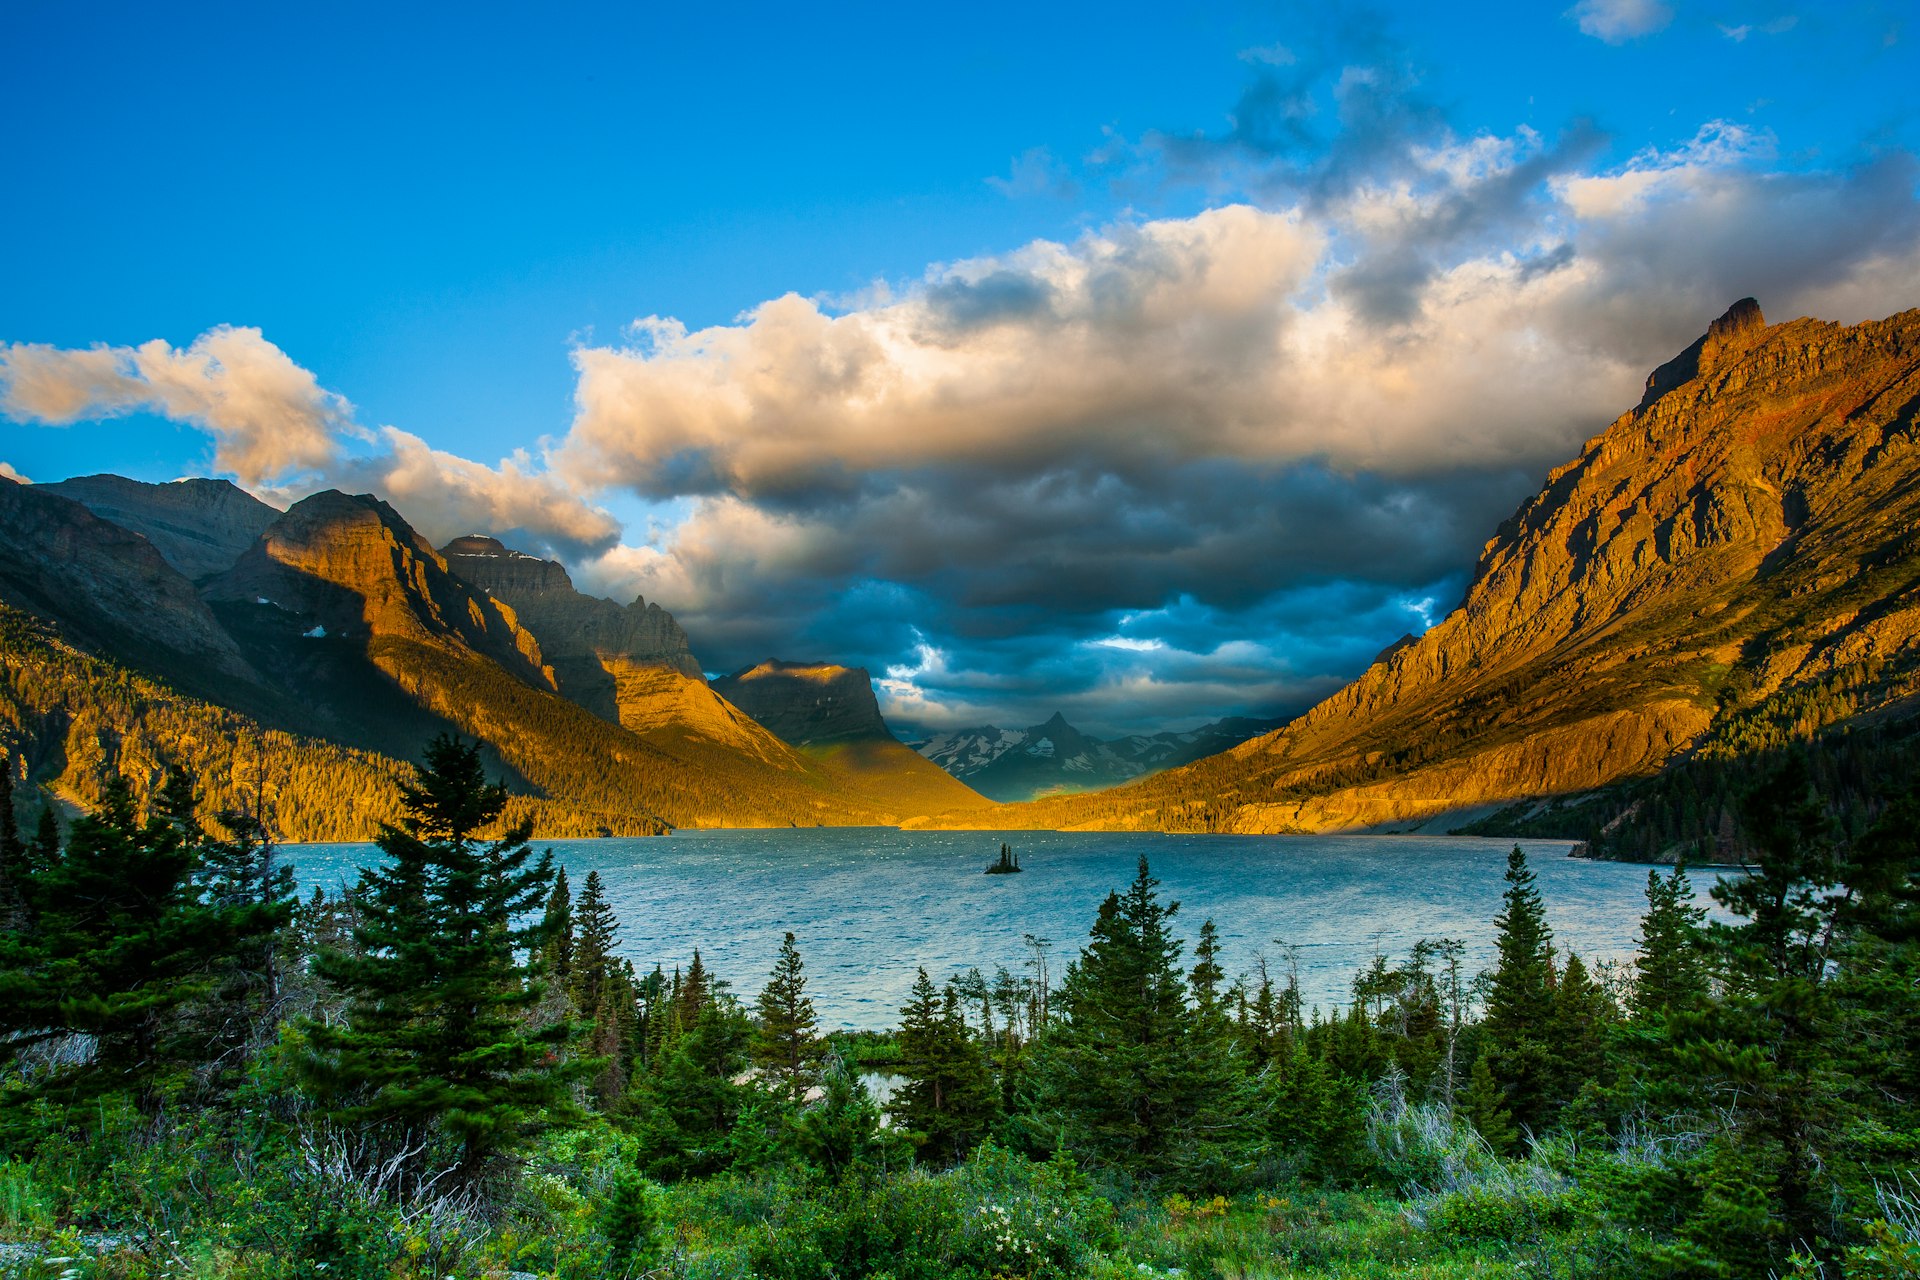  Wild goose island viewpoint, Glacier National Park